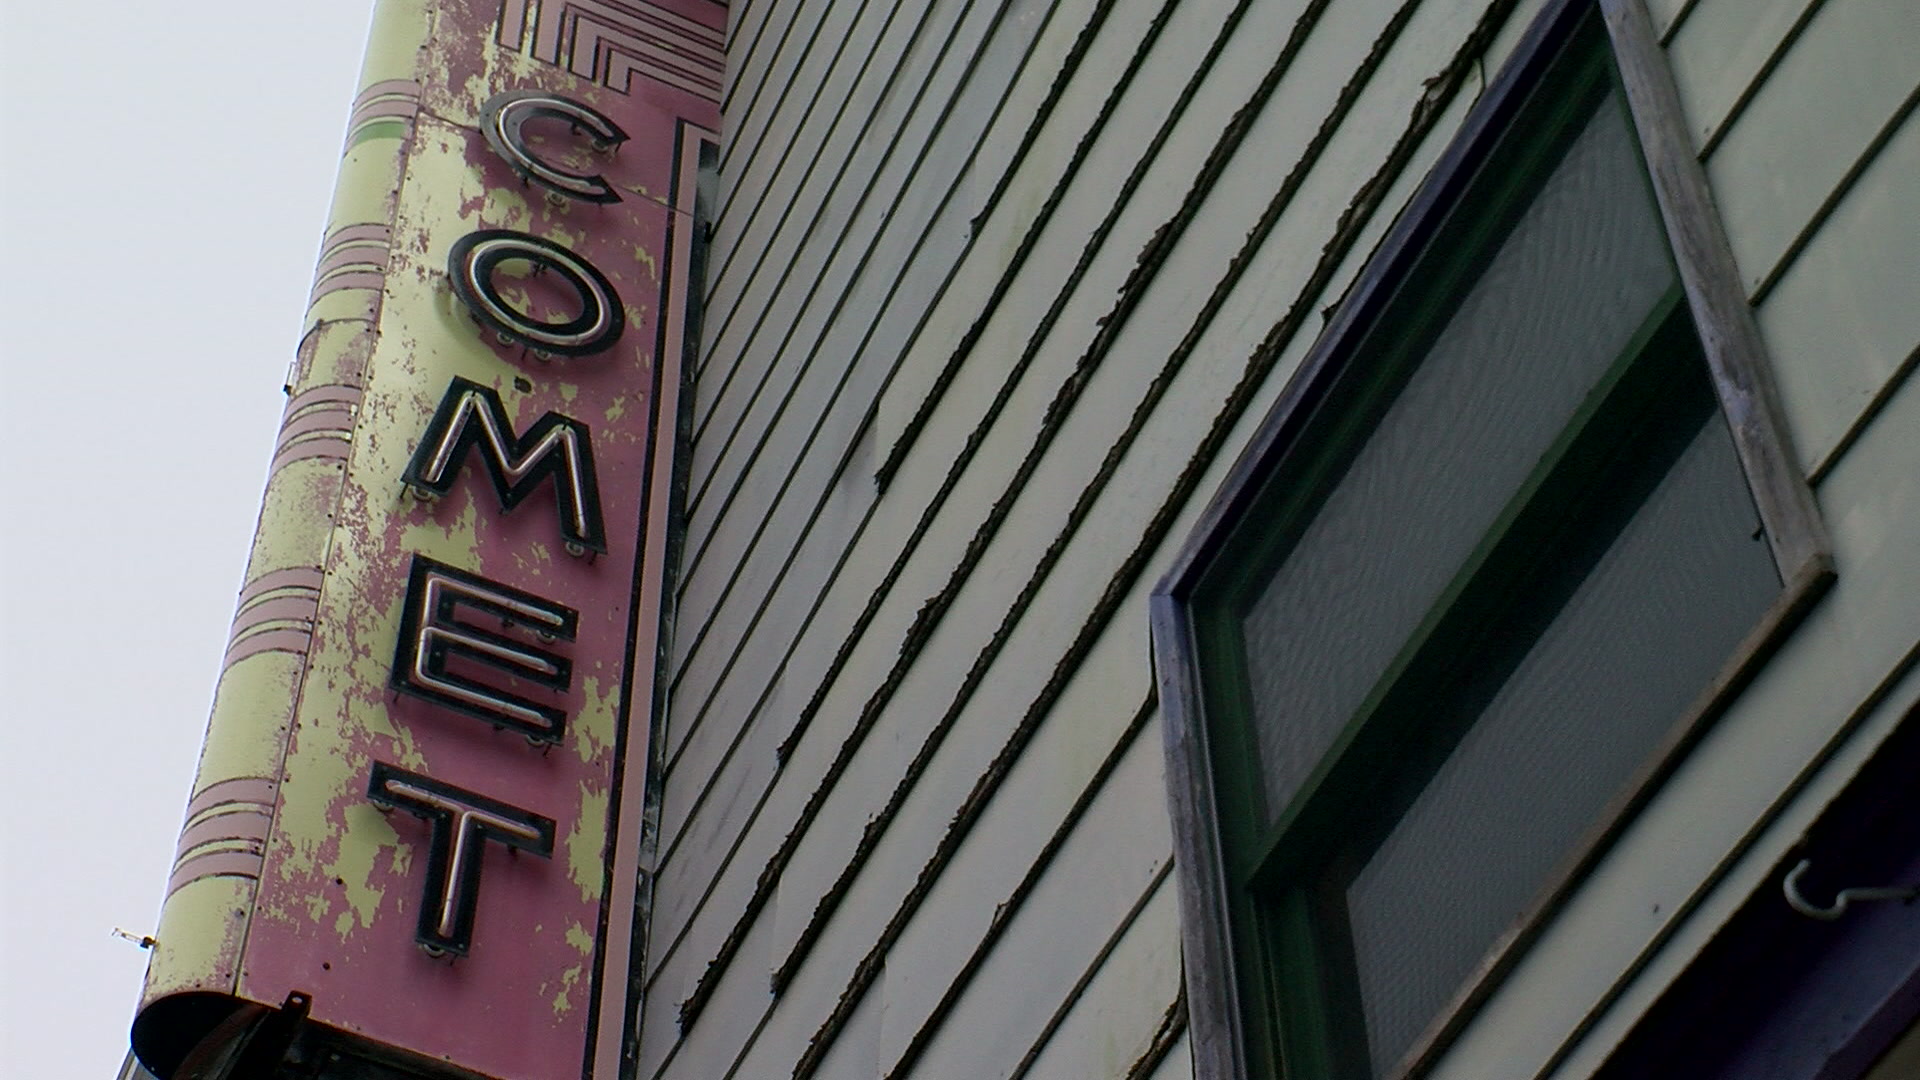 Finding Minnesota: Comet Theater Is State’s Oldest Continuously-Running, Single-Screen Movie House